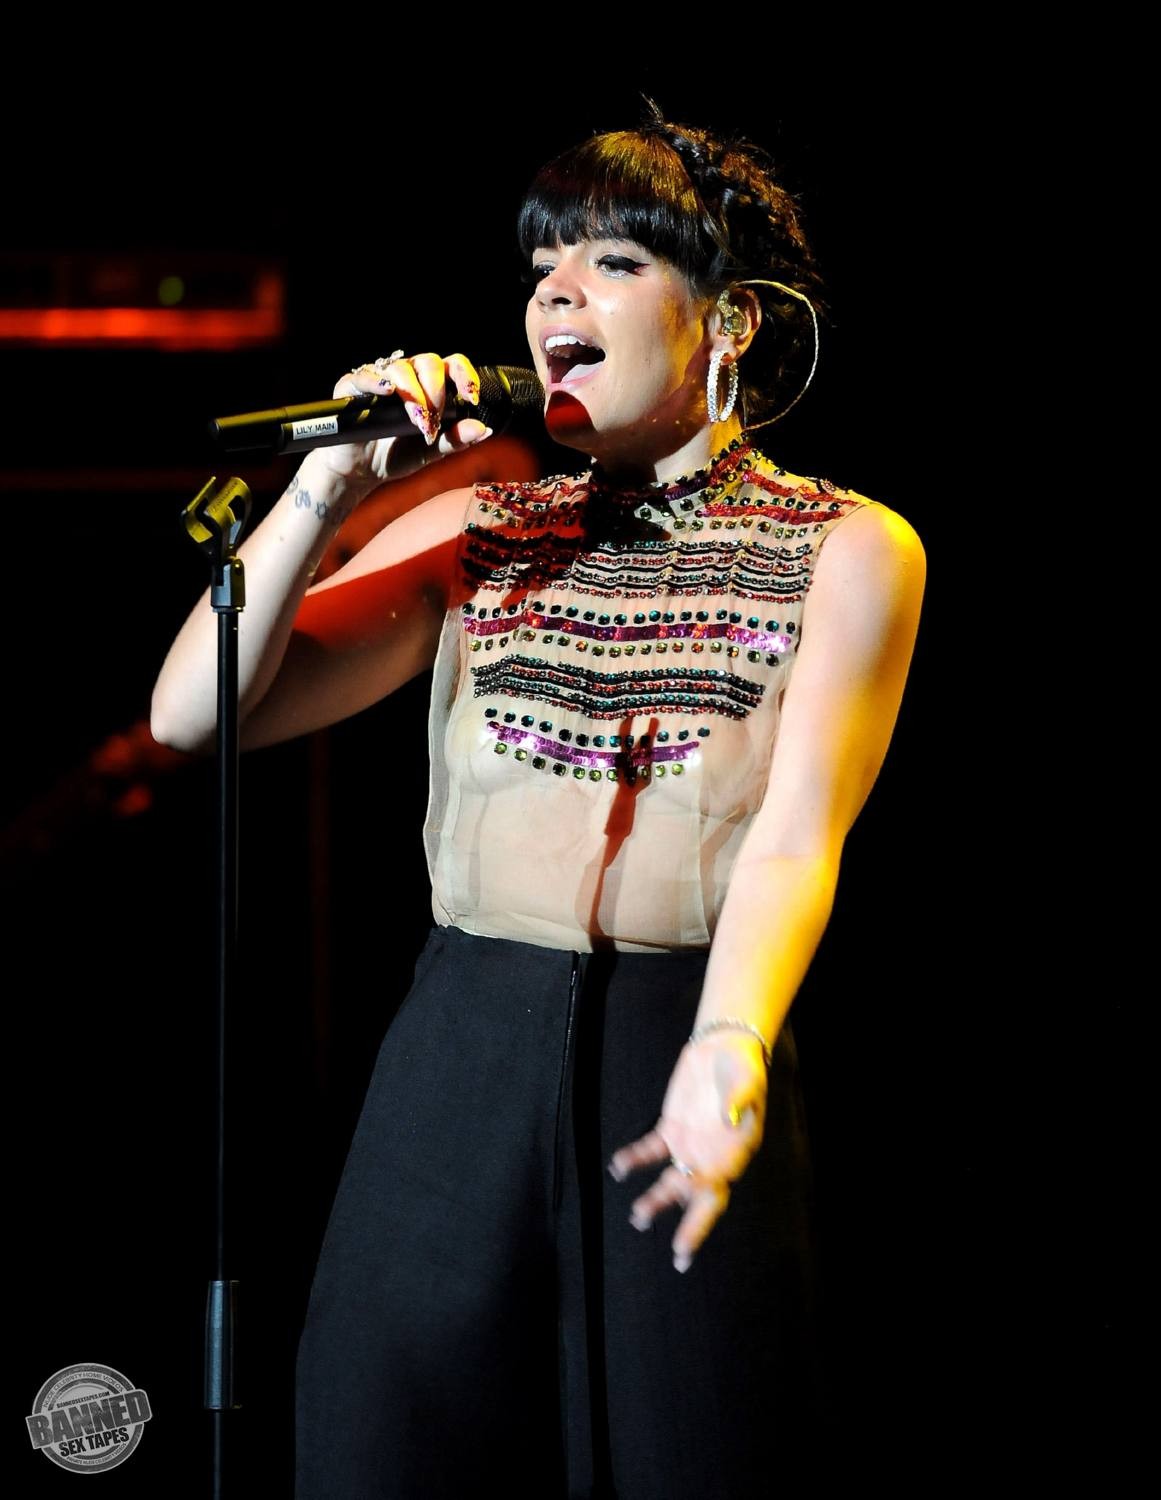 Lily Allen  see her nude tits through transparent top during concert #75191553